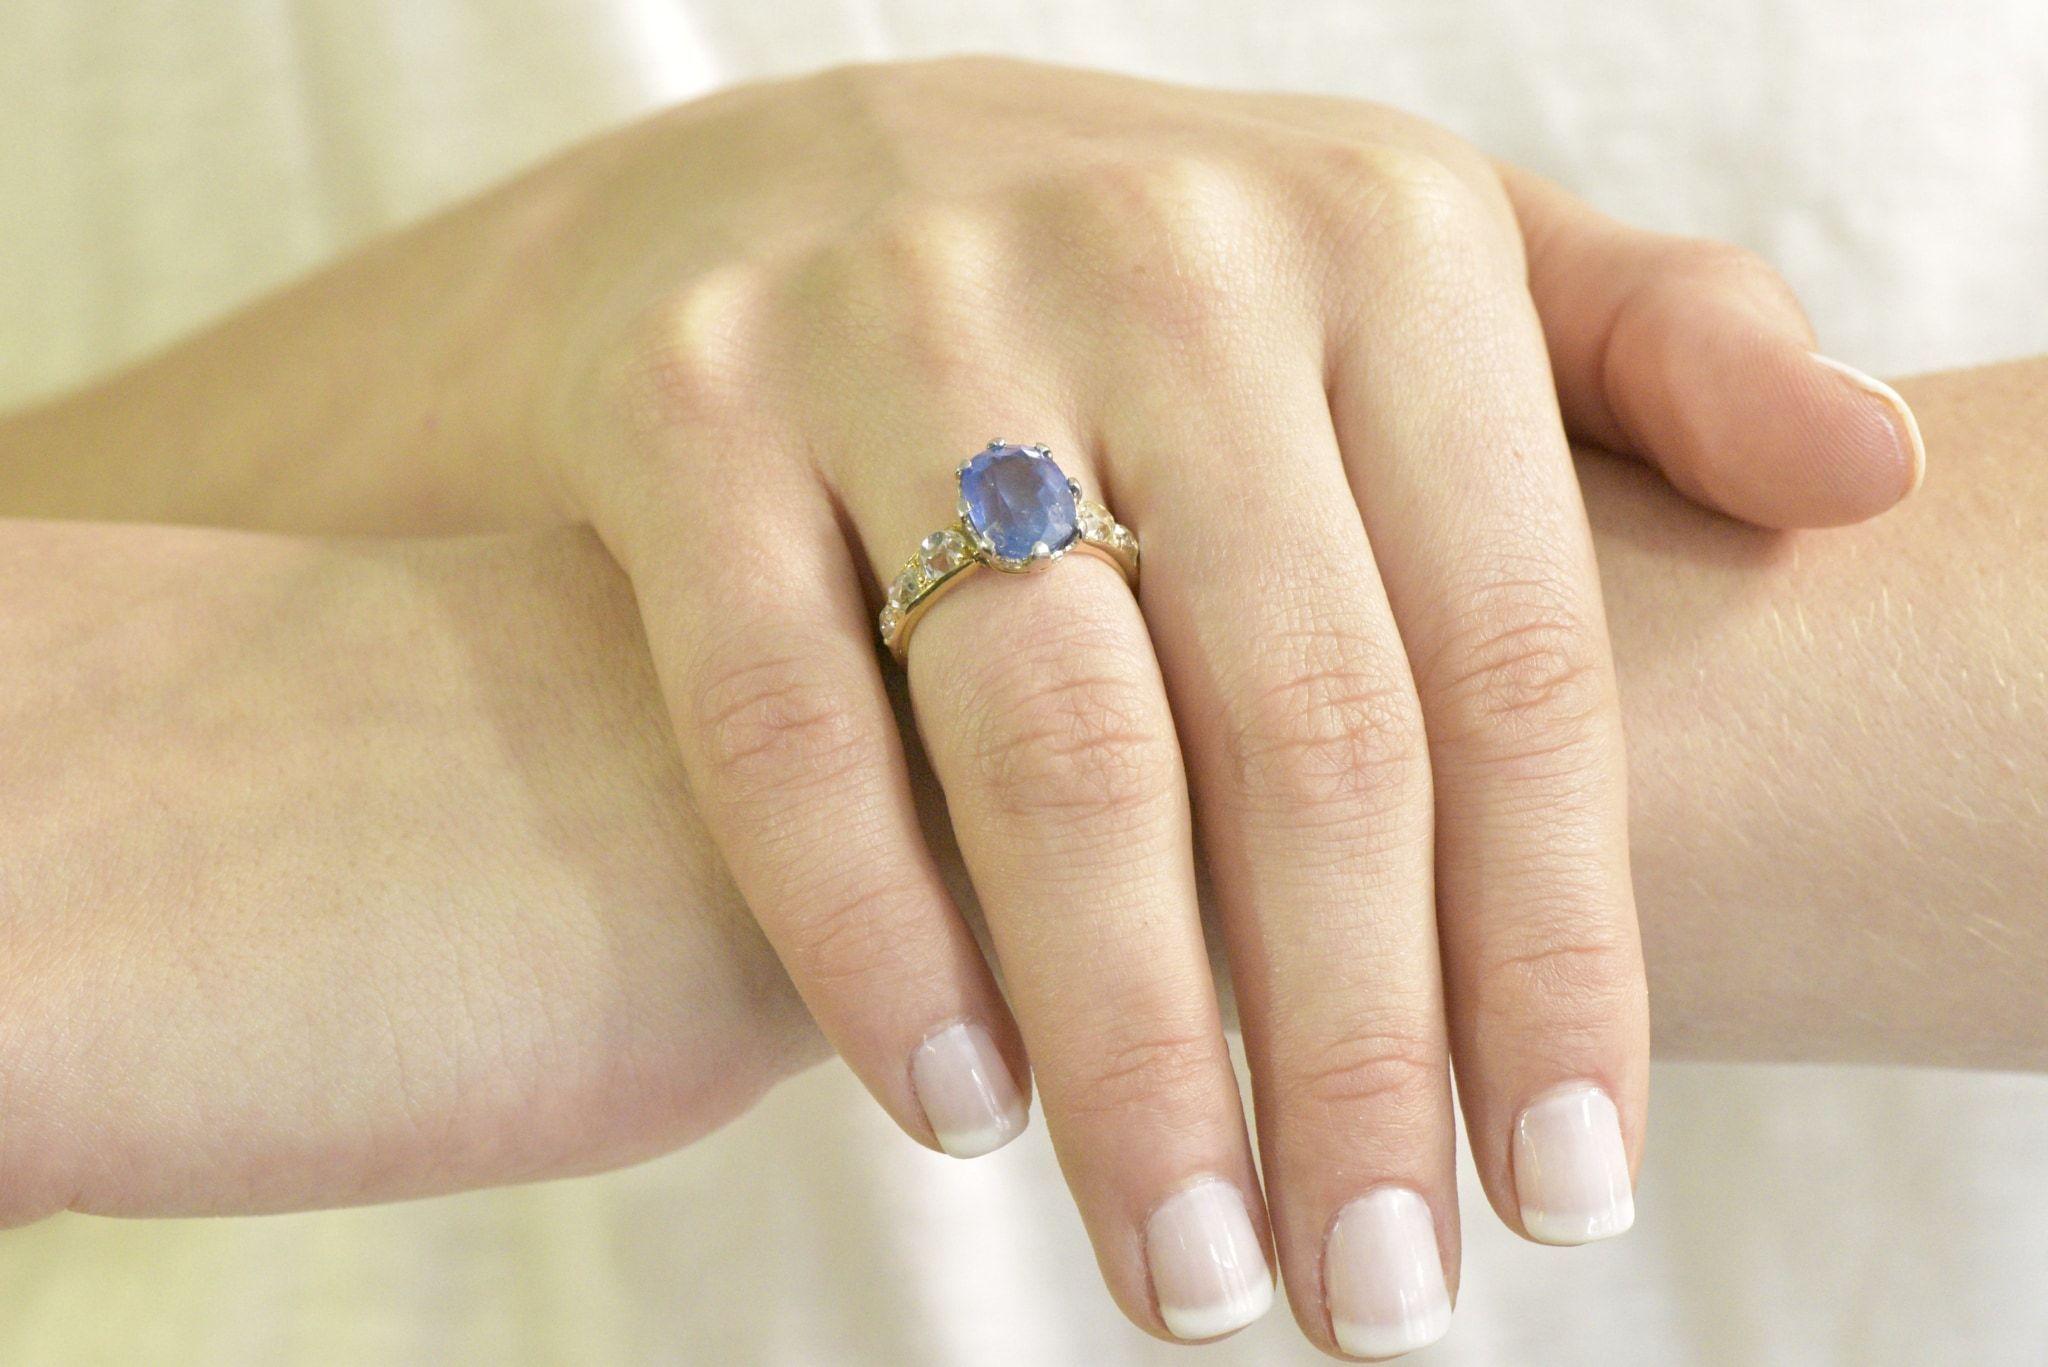 Centering a natural 6.96 carat unheated cornflower blue Ceylon sapphire with very slight natural inclusions 

Prong set in platinum with heart motif filigree surround

Flanked by old mine cut diamonds weighing approximately 1.70 carats;  I to J